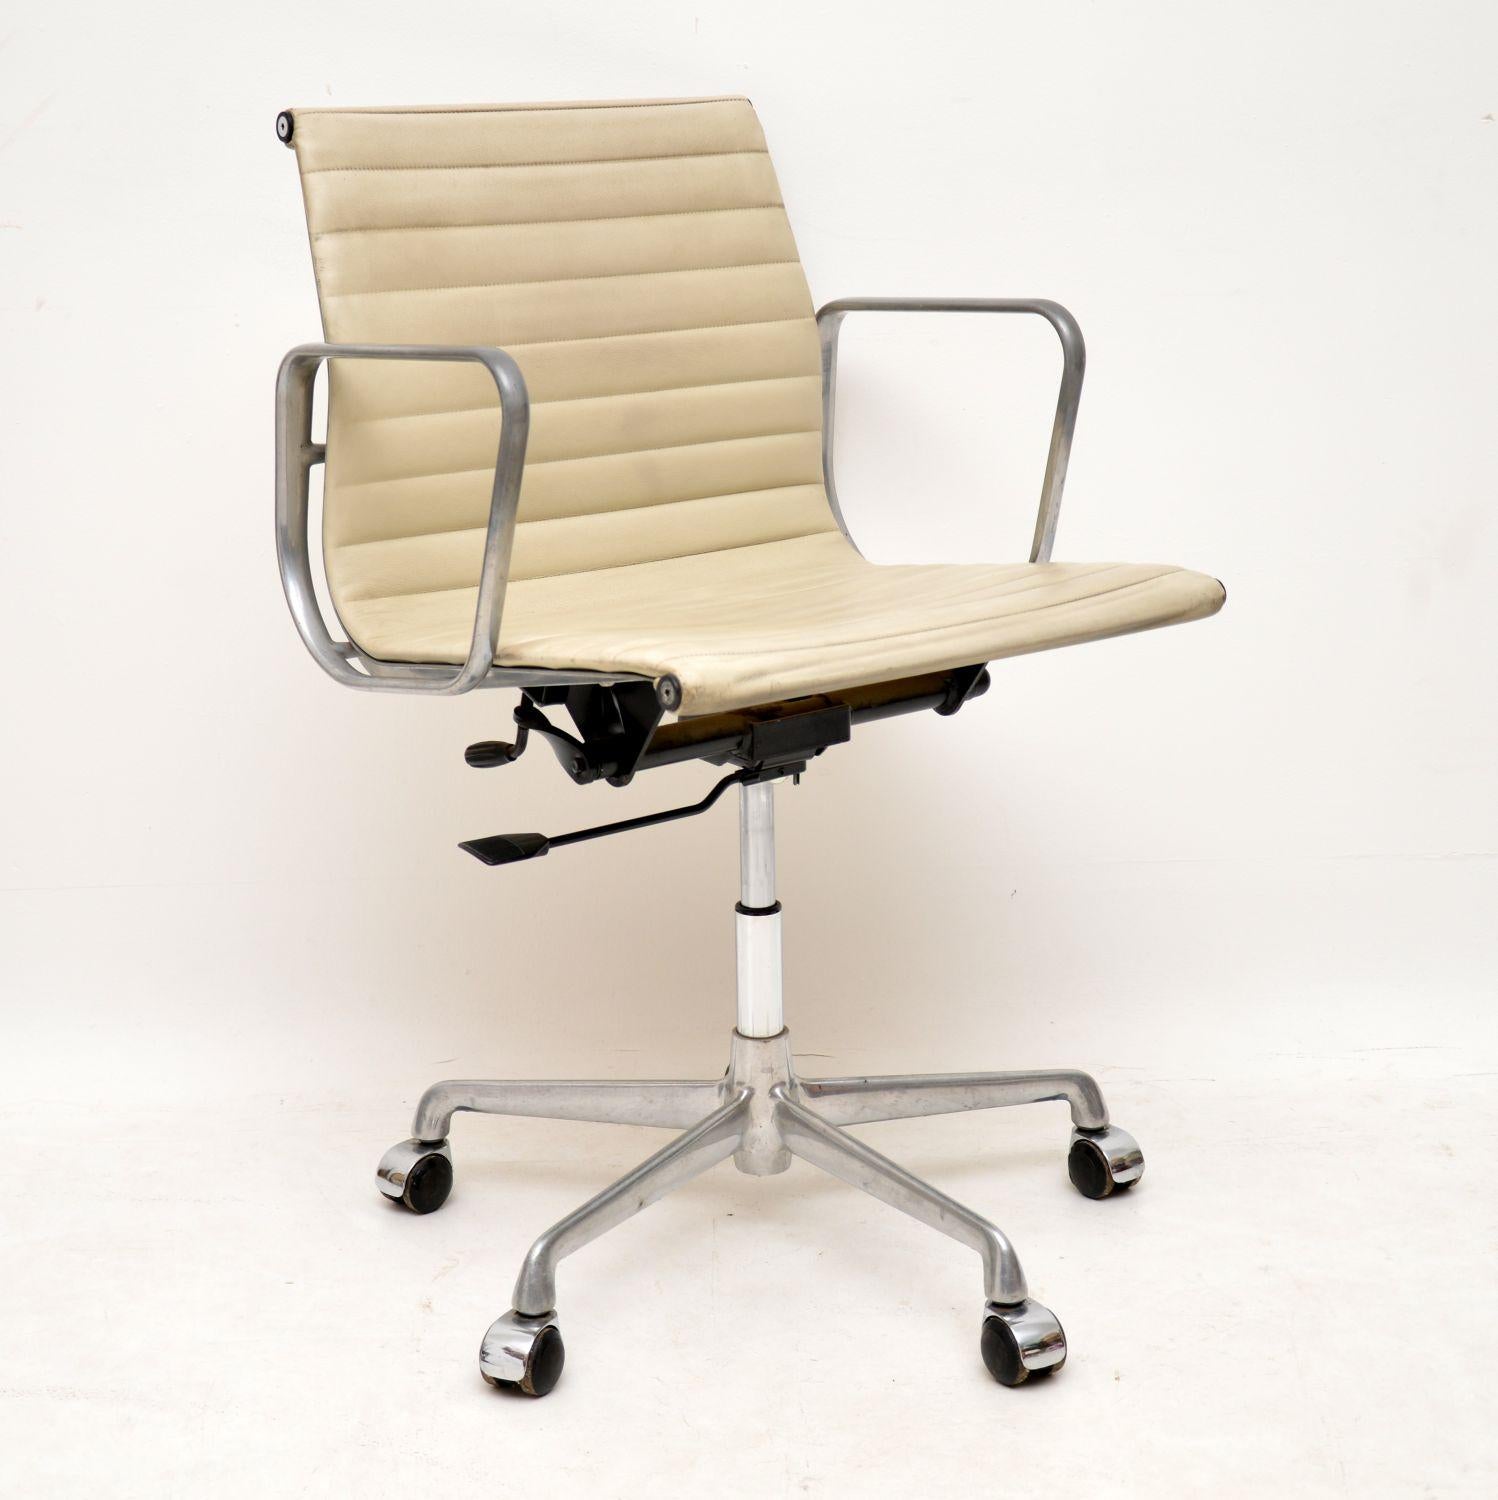 A fantastic original licensed EA108 leather and aluminium desk chair designed by Charles Eames. This was made by ICF Italy in the 1970s-1980s, they were one of only a handful of licensed manufacturers, using genuine Herman Miller machinery. This